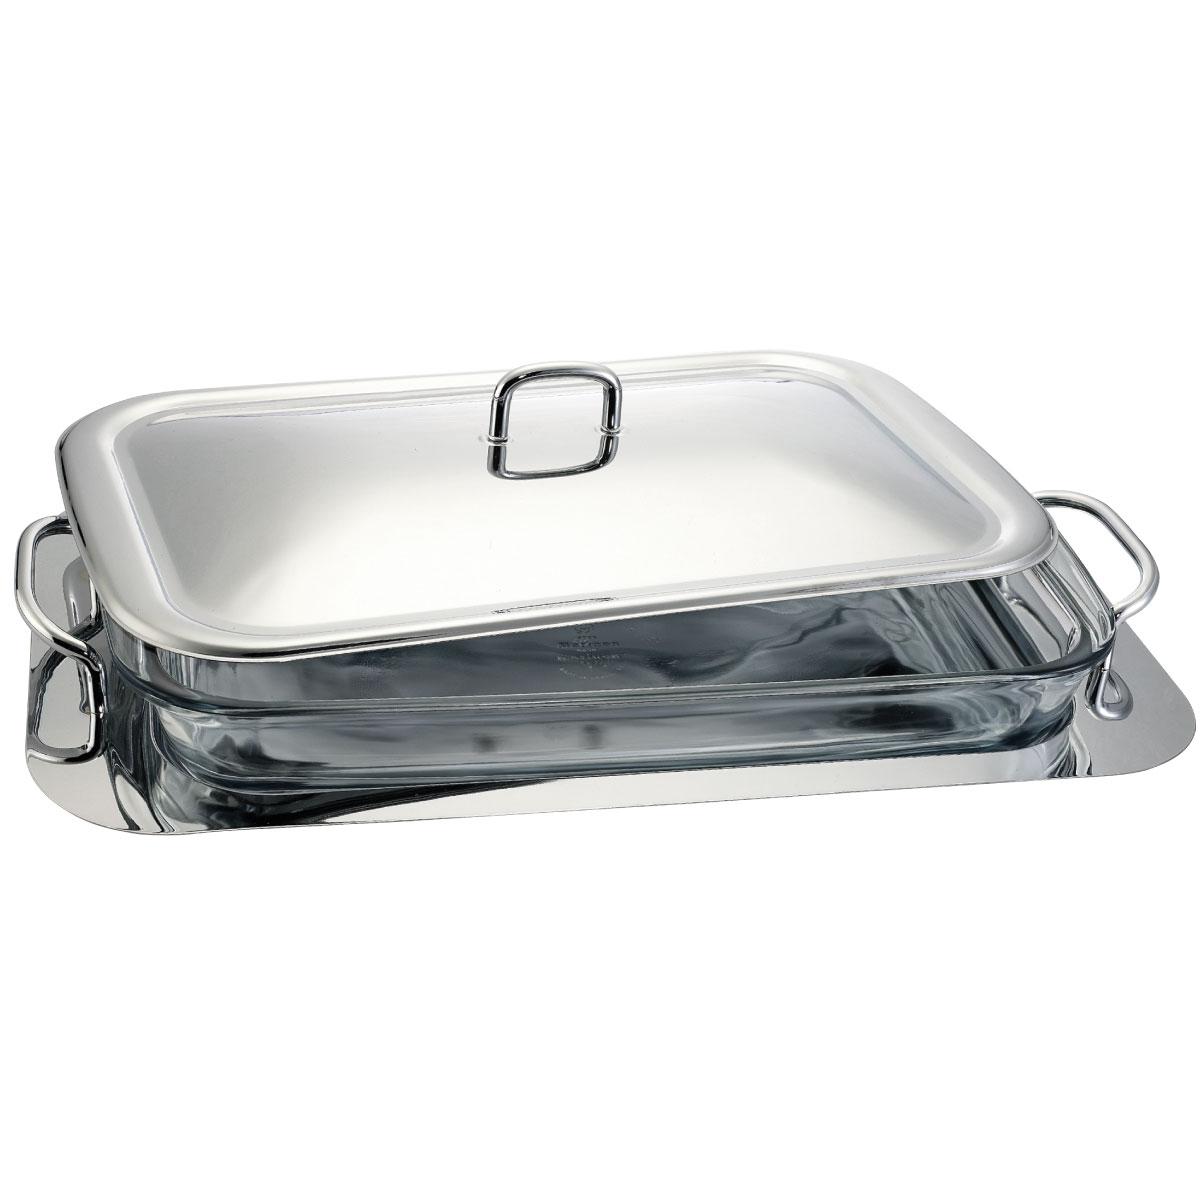 Berlinger Haus 2 in 1 Rectlangular Food Container and Serving Tray 3 Liter Silver Stainless Steel